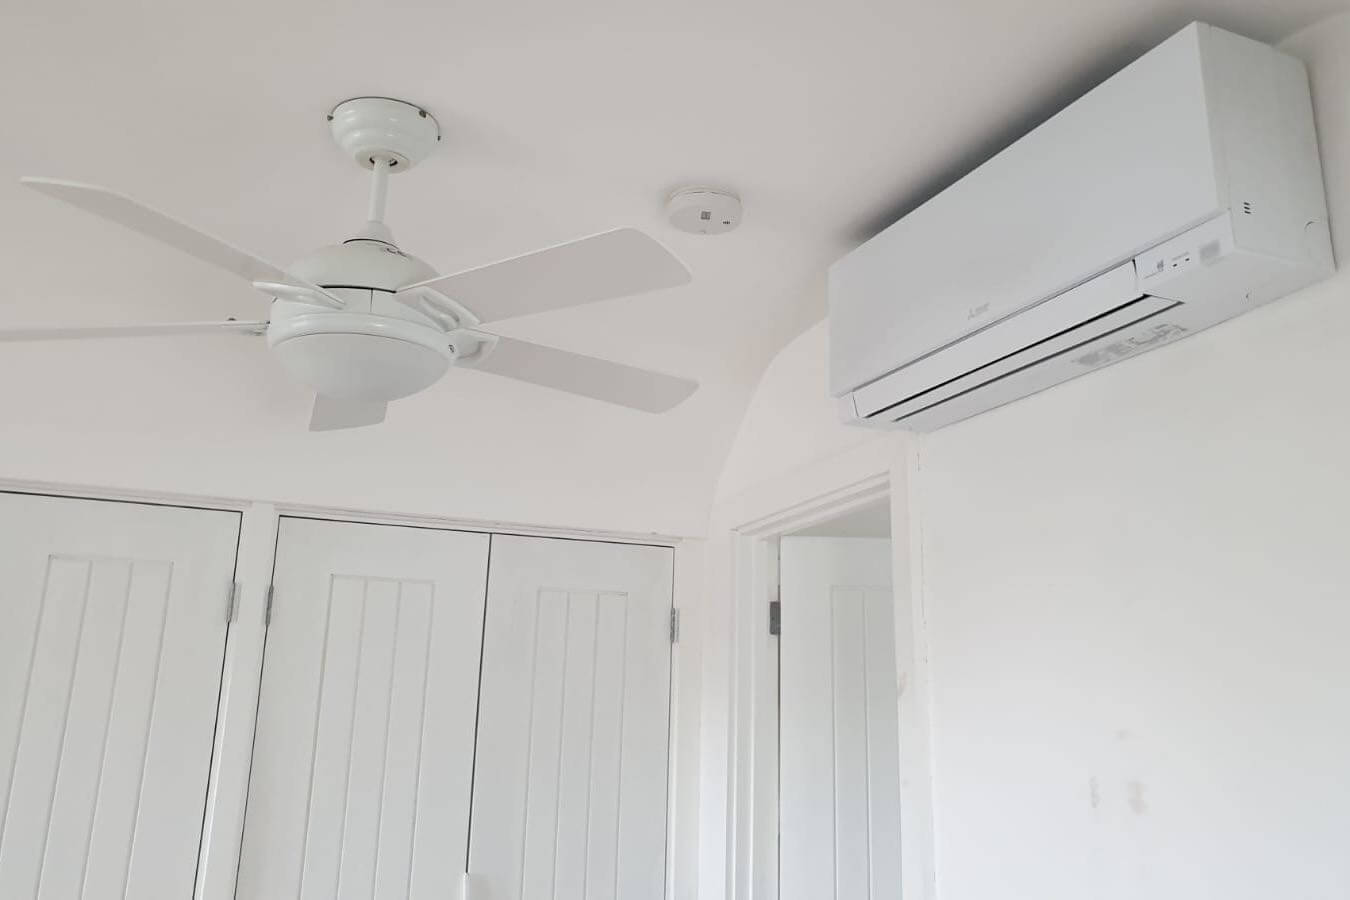 White wall mounted mitsubishi electric zen air conditioning unit in white room next to ceiling fan and cupboards